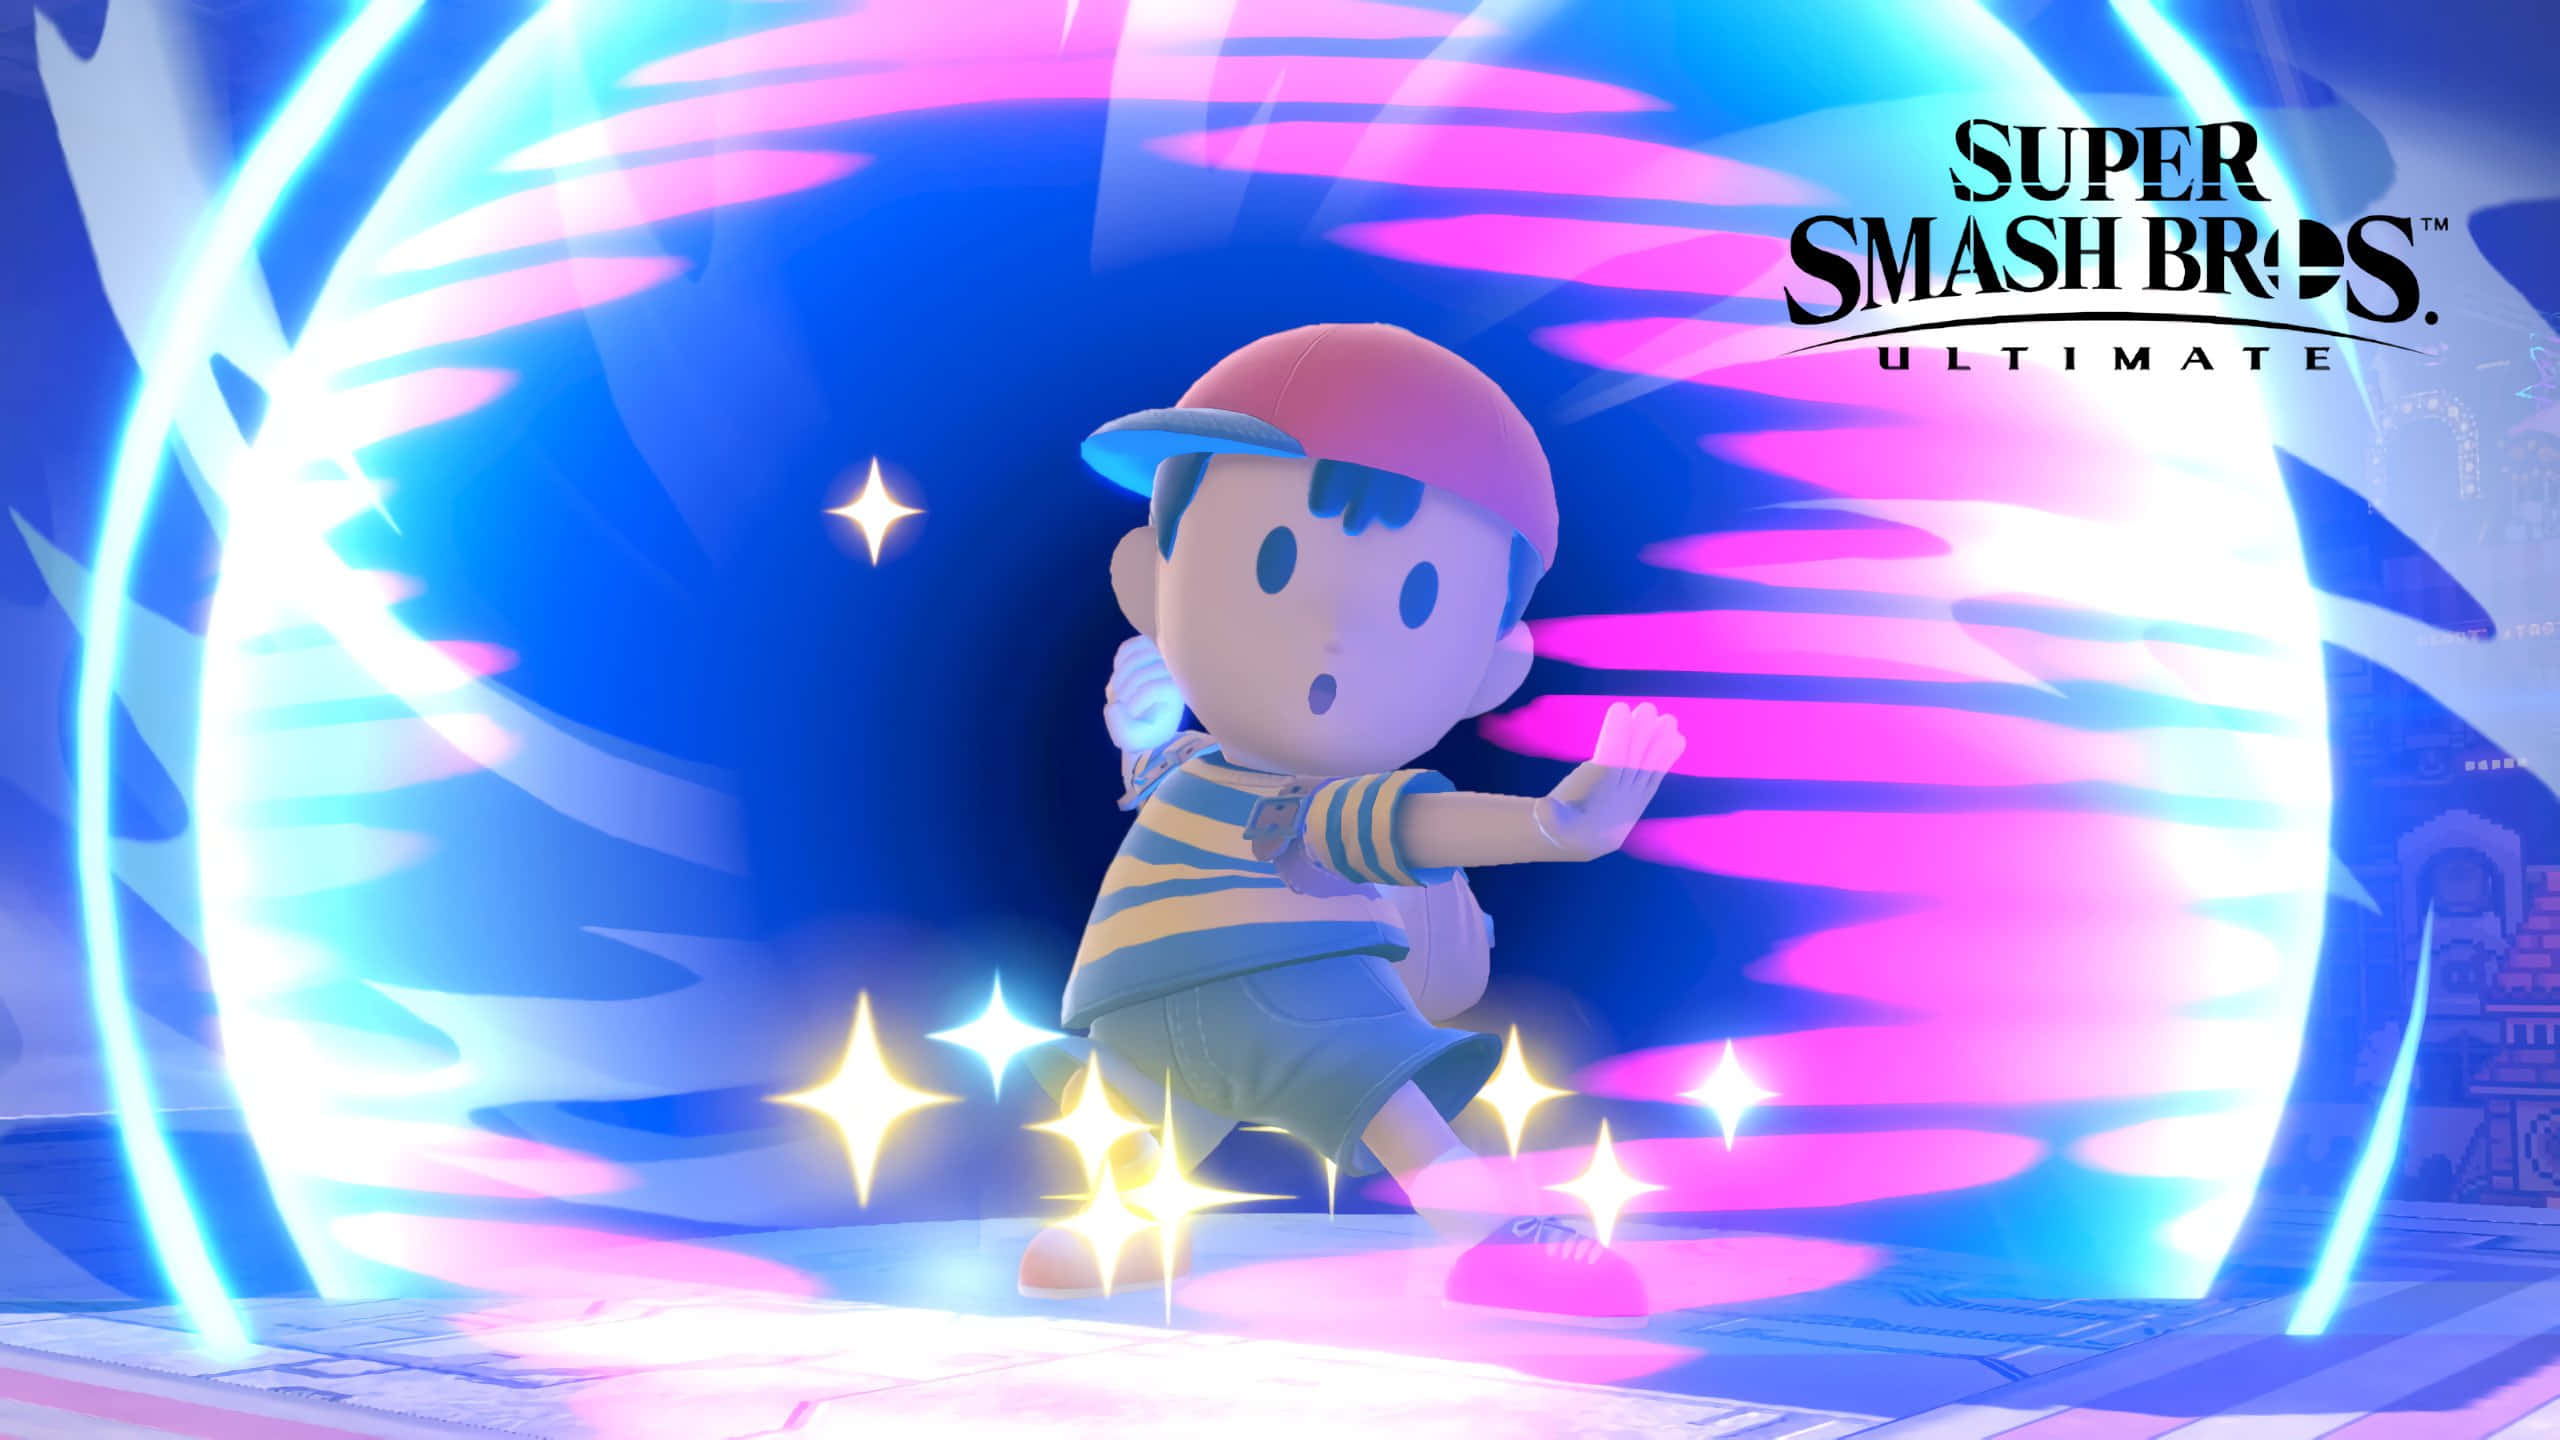 Journey with Ness and explore the world of EarthBound